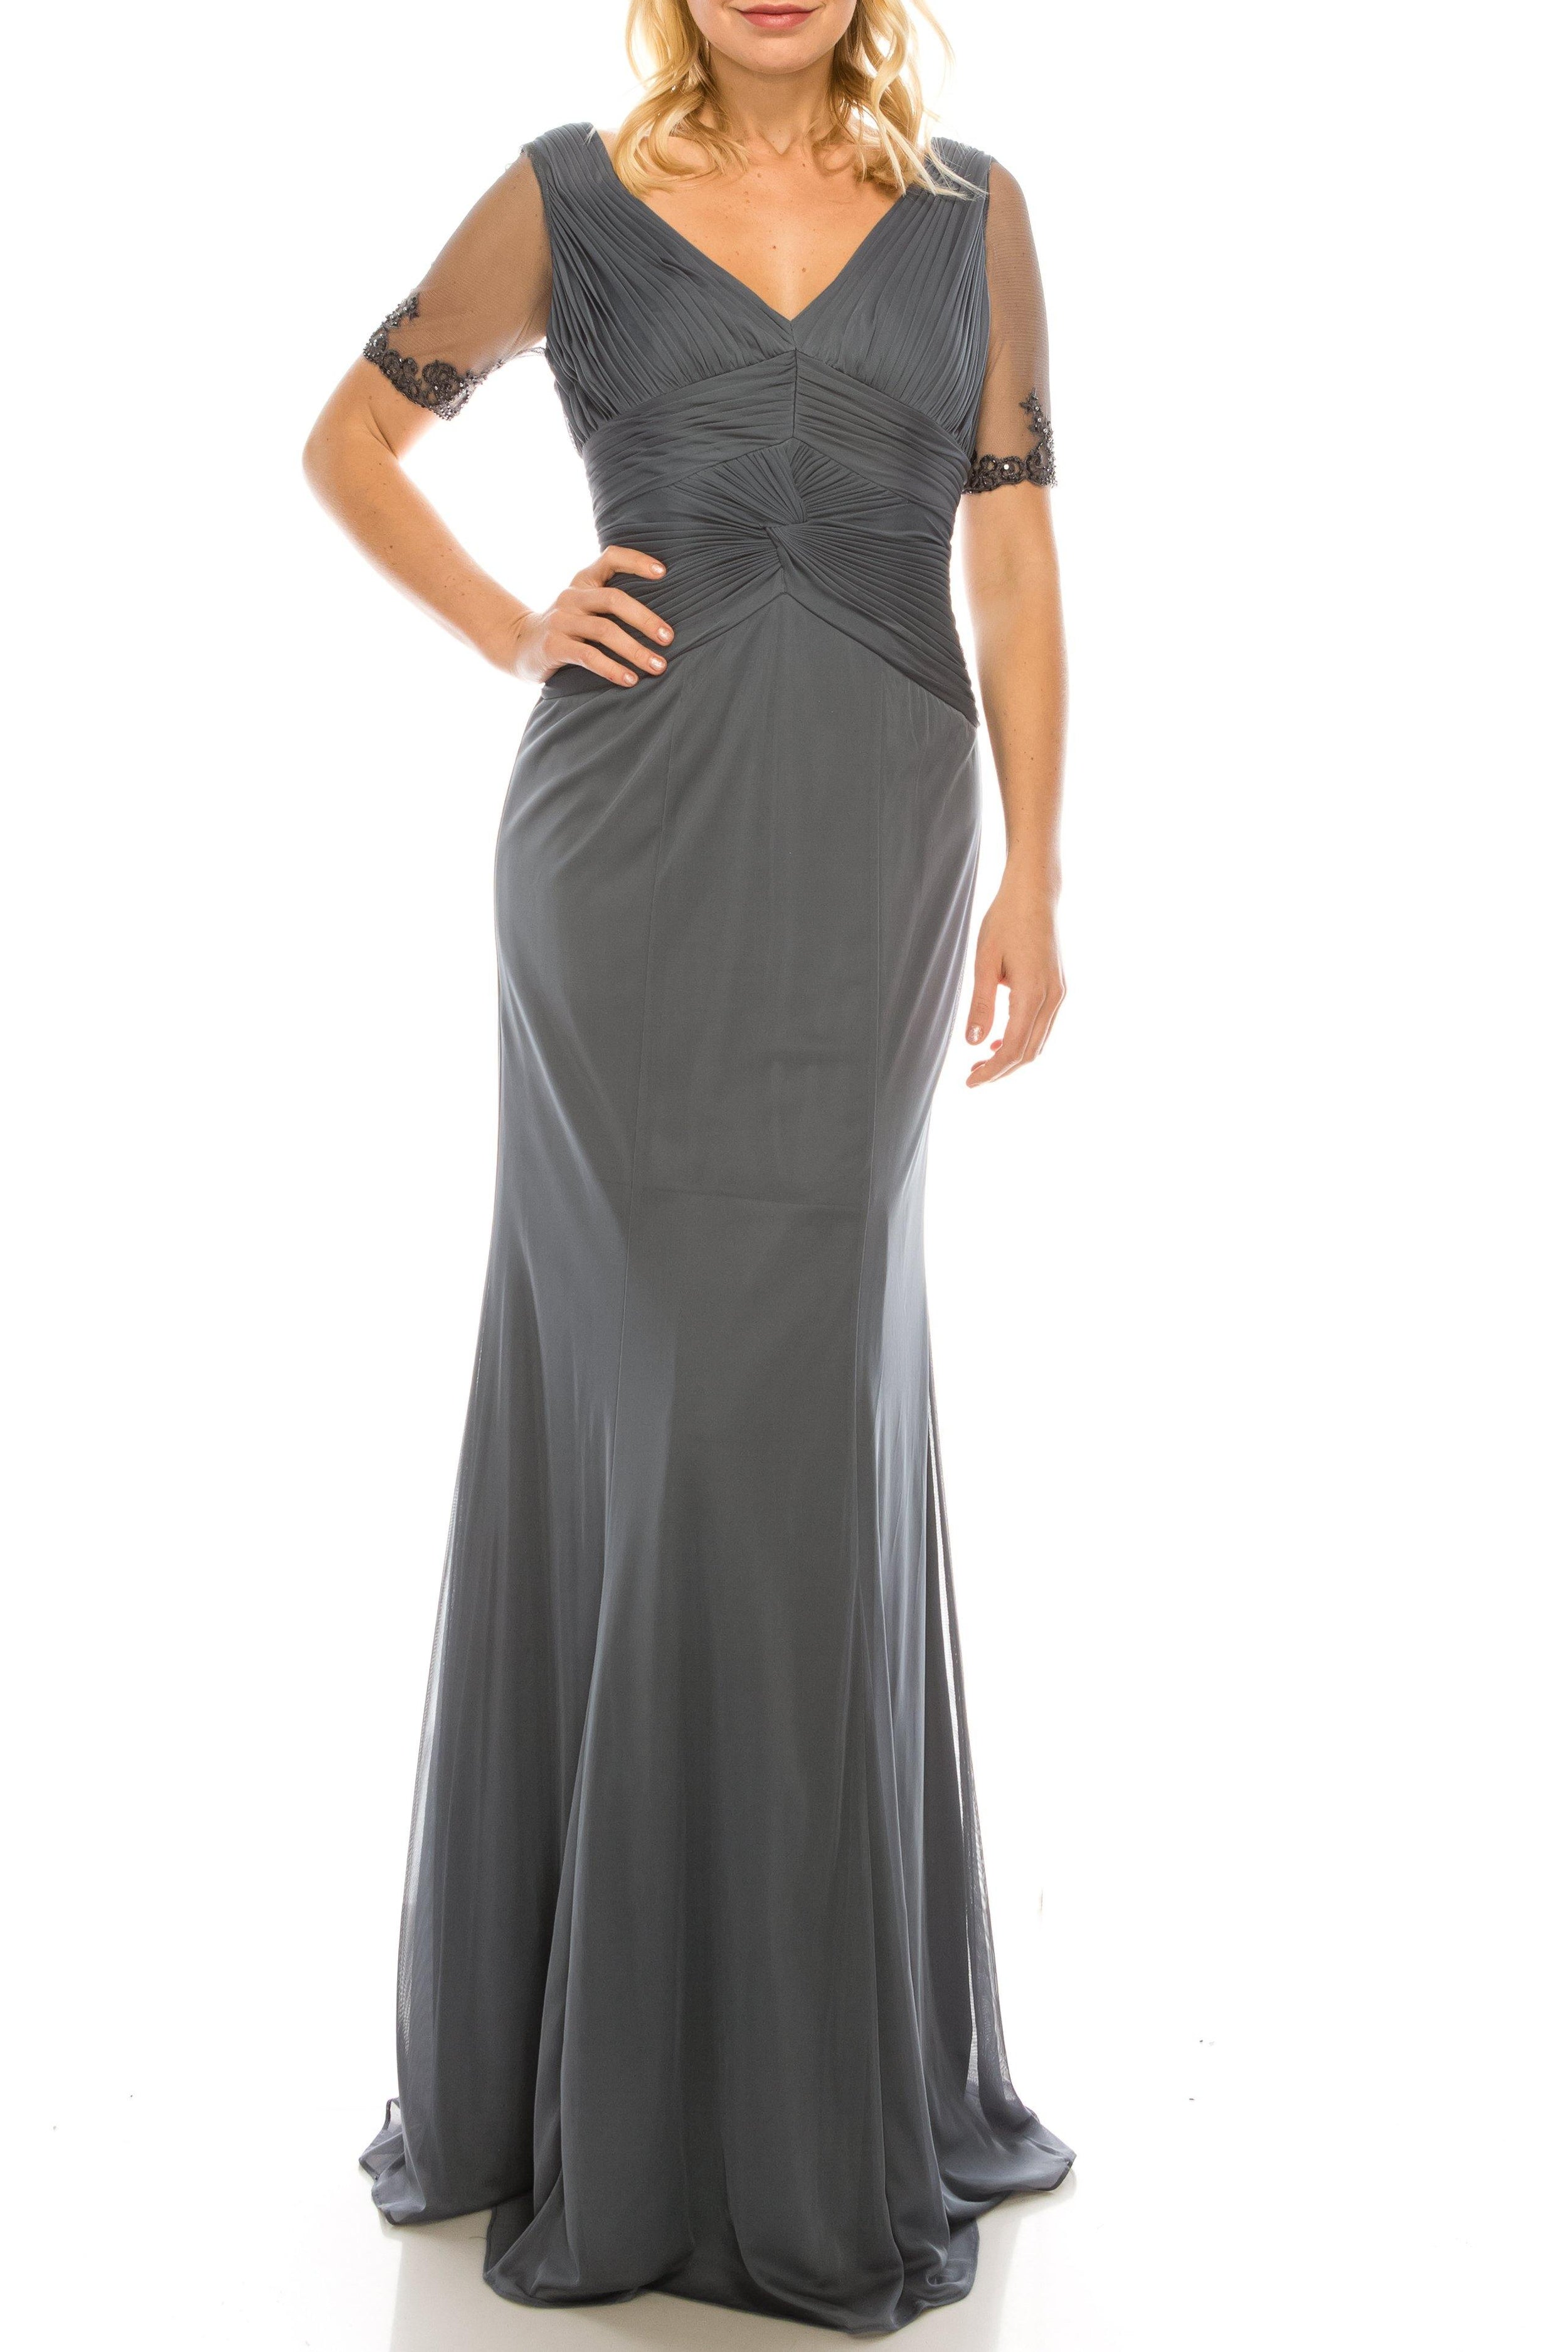 Adrianna Papell Long Formal Pleated Evening Dress - The Dress Outlet